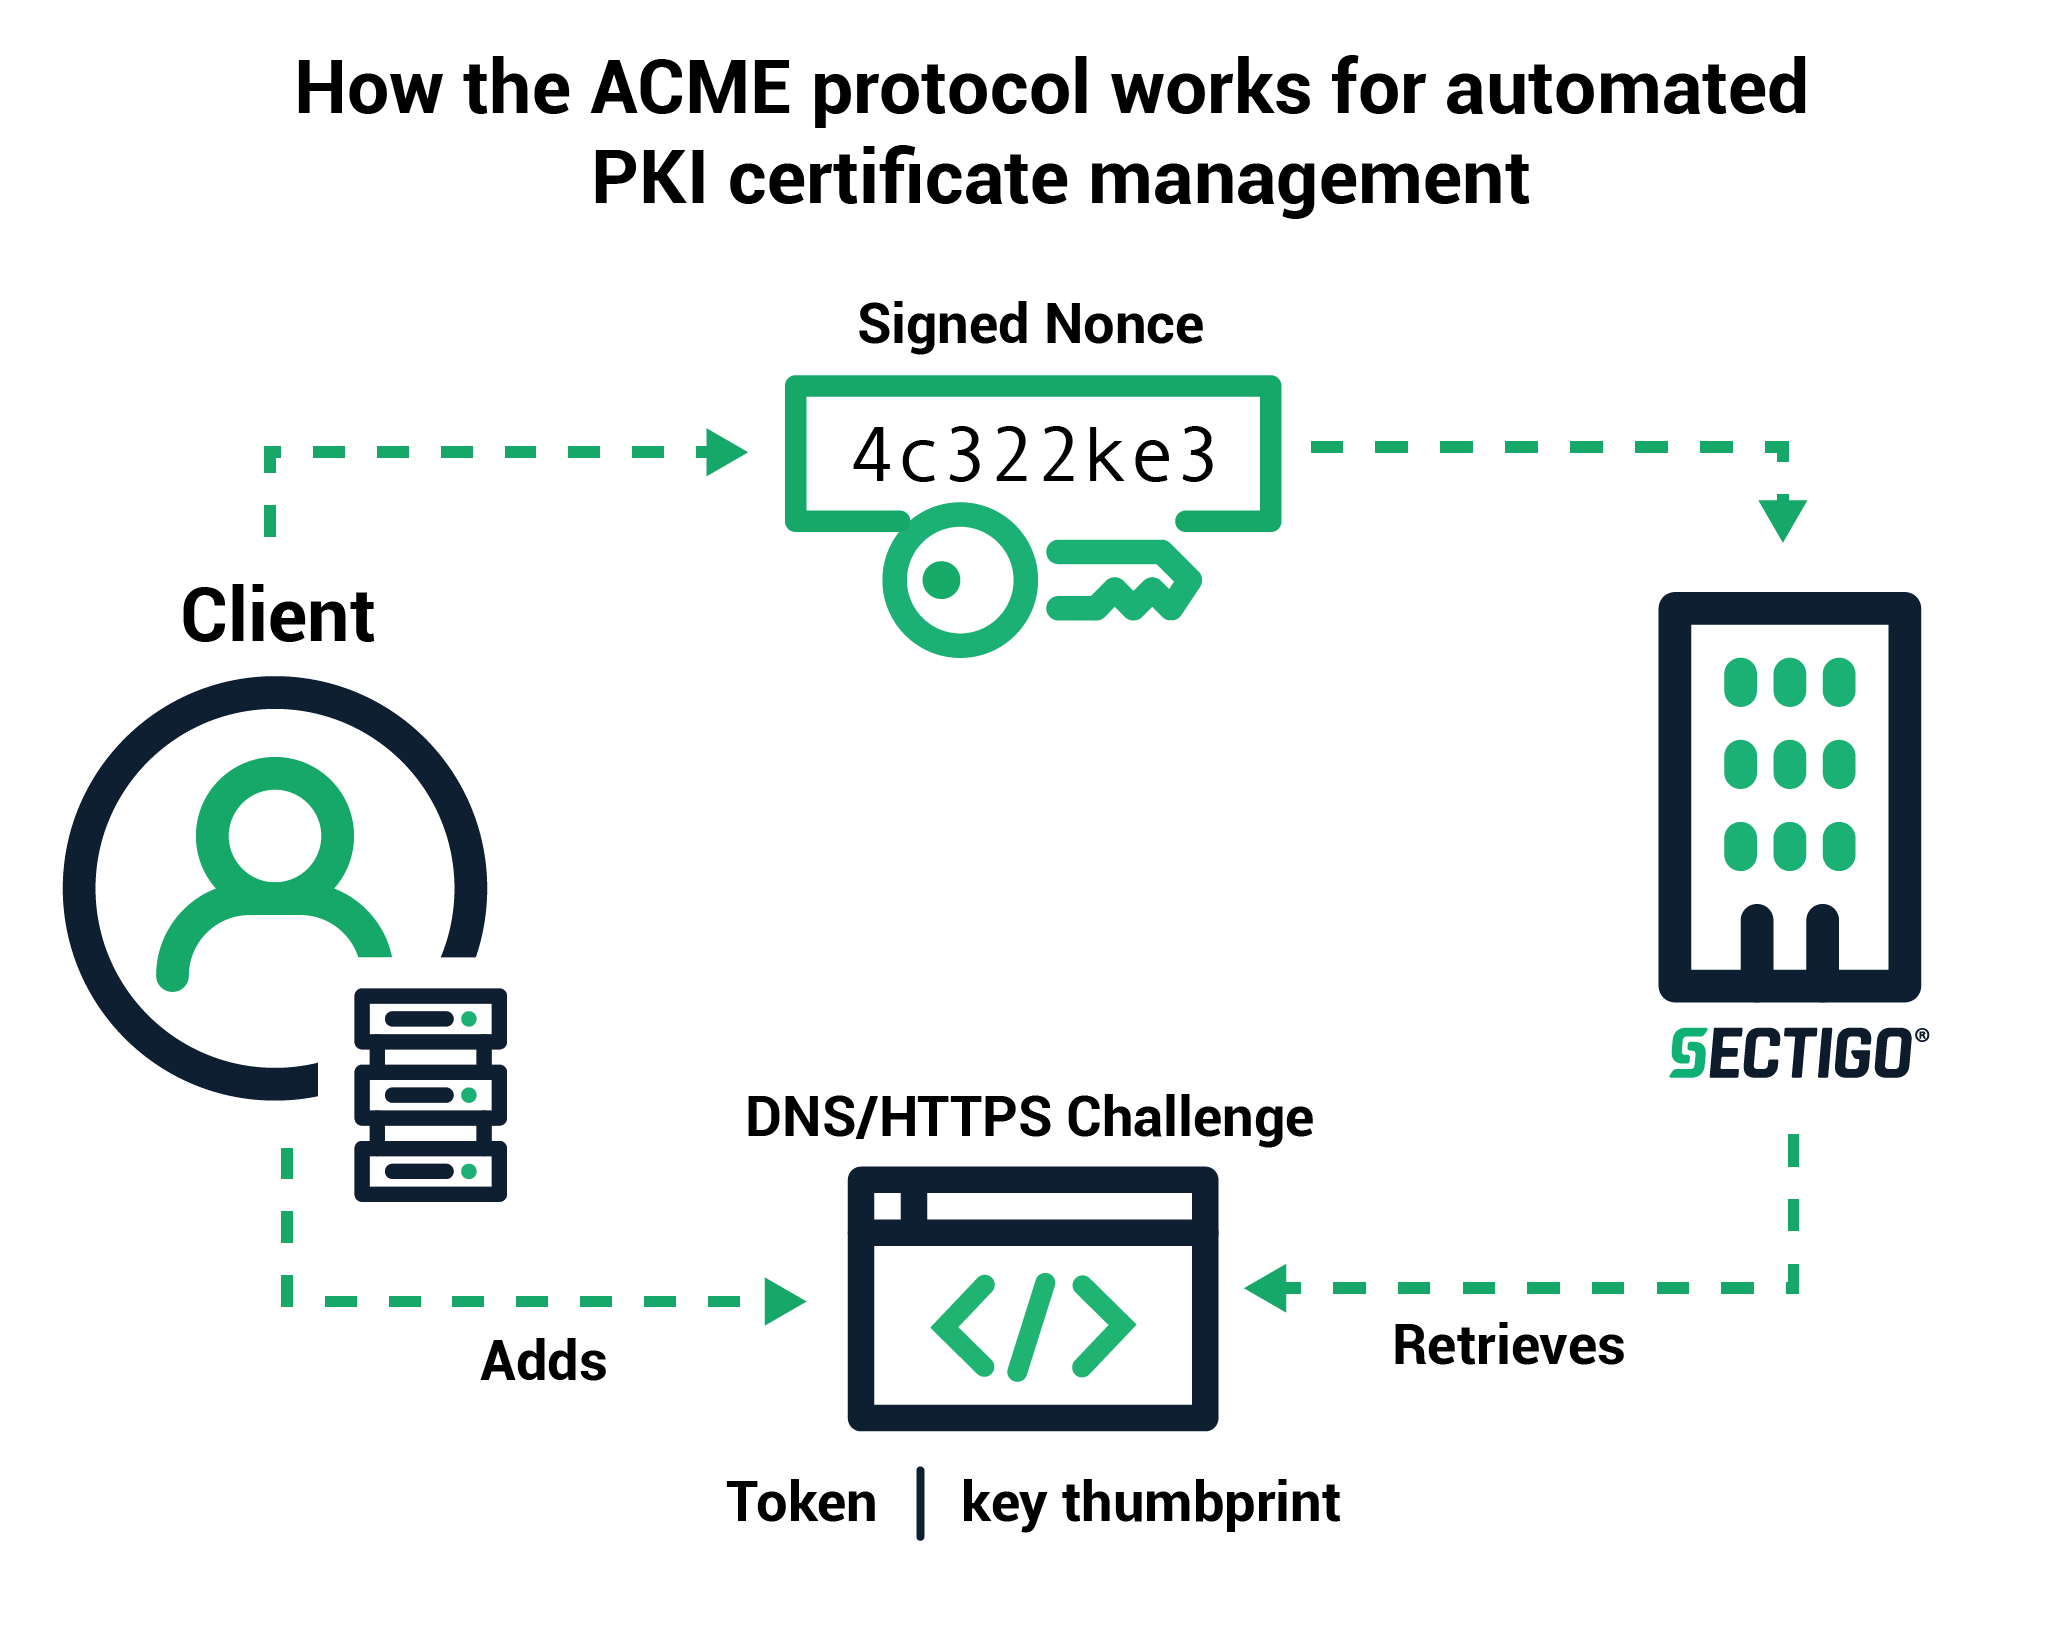 How the ACME protocol works for automated PKI certificate management